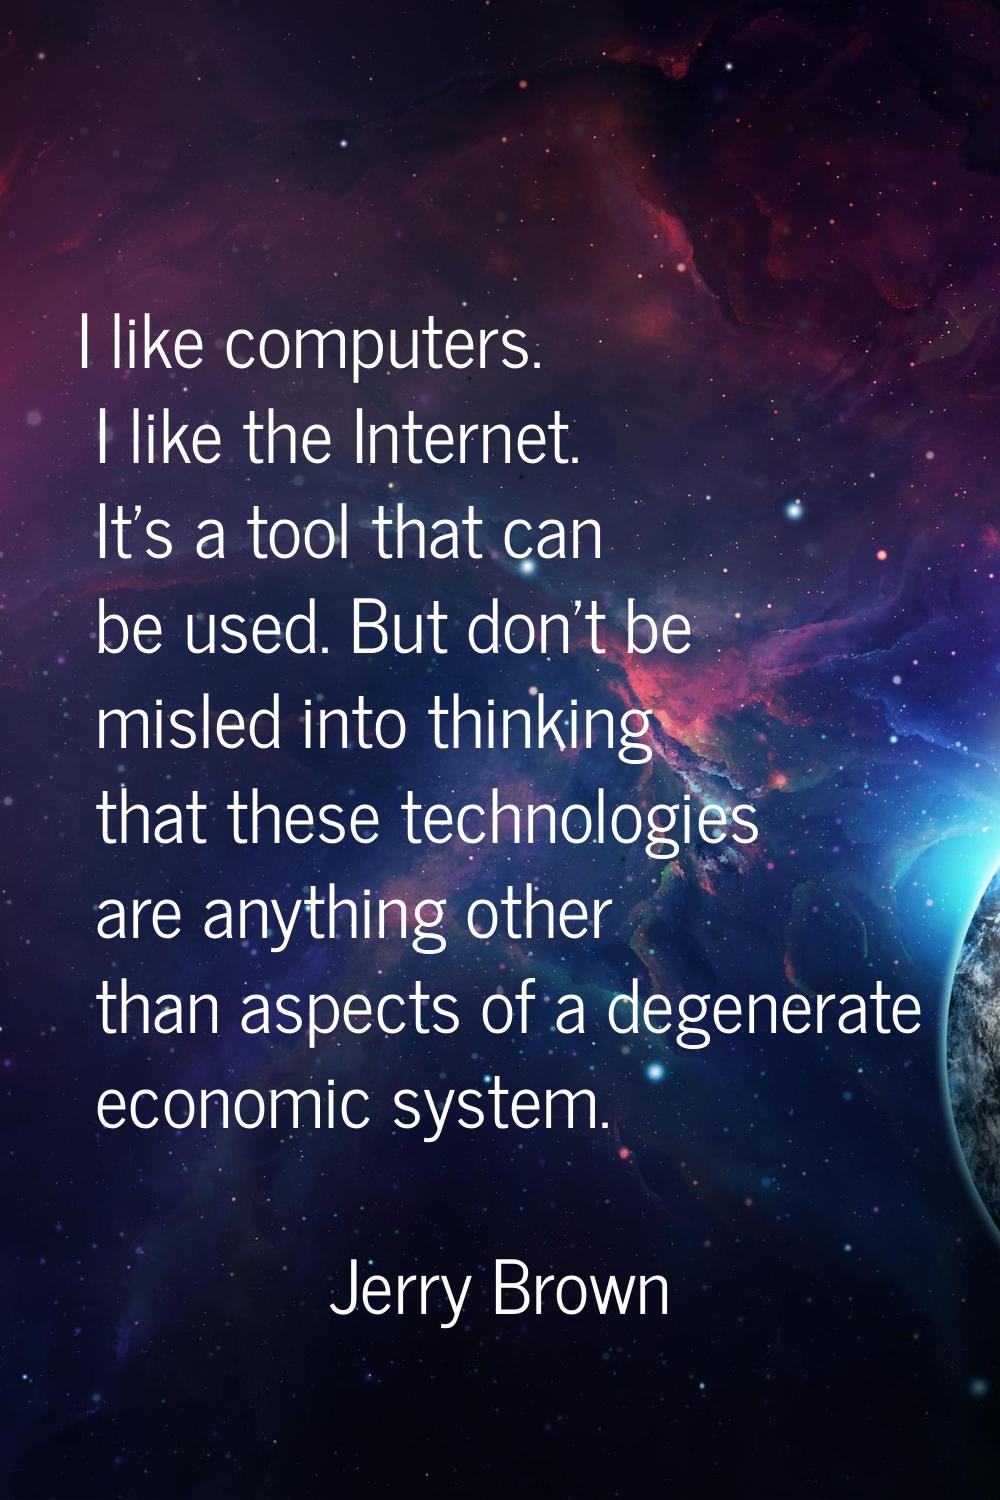 I like computers. I like the Internet. It's a tool that can be used. But don't be misled into think